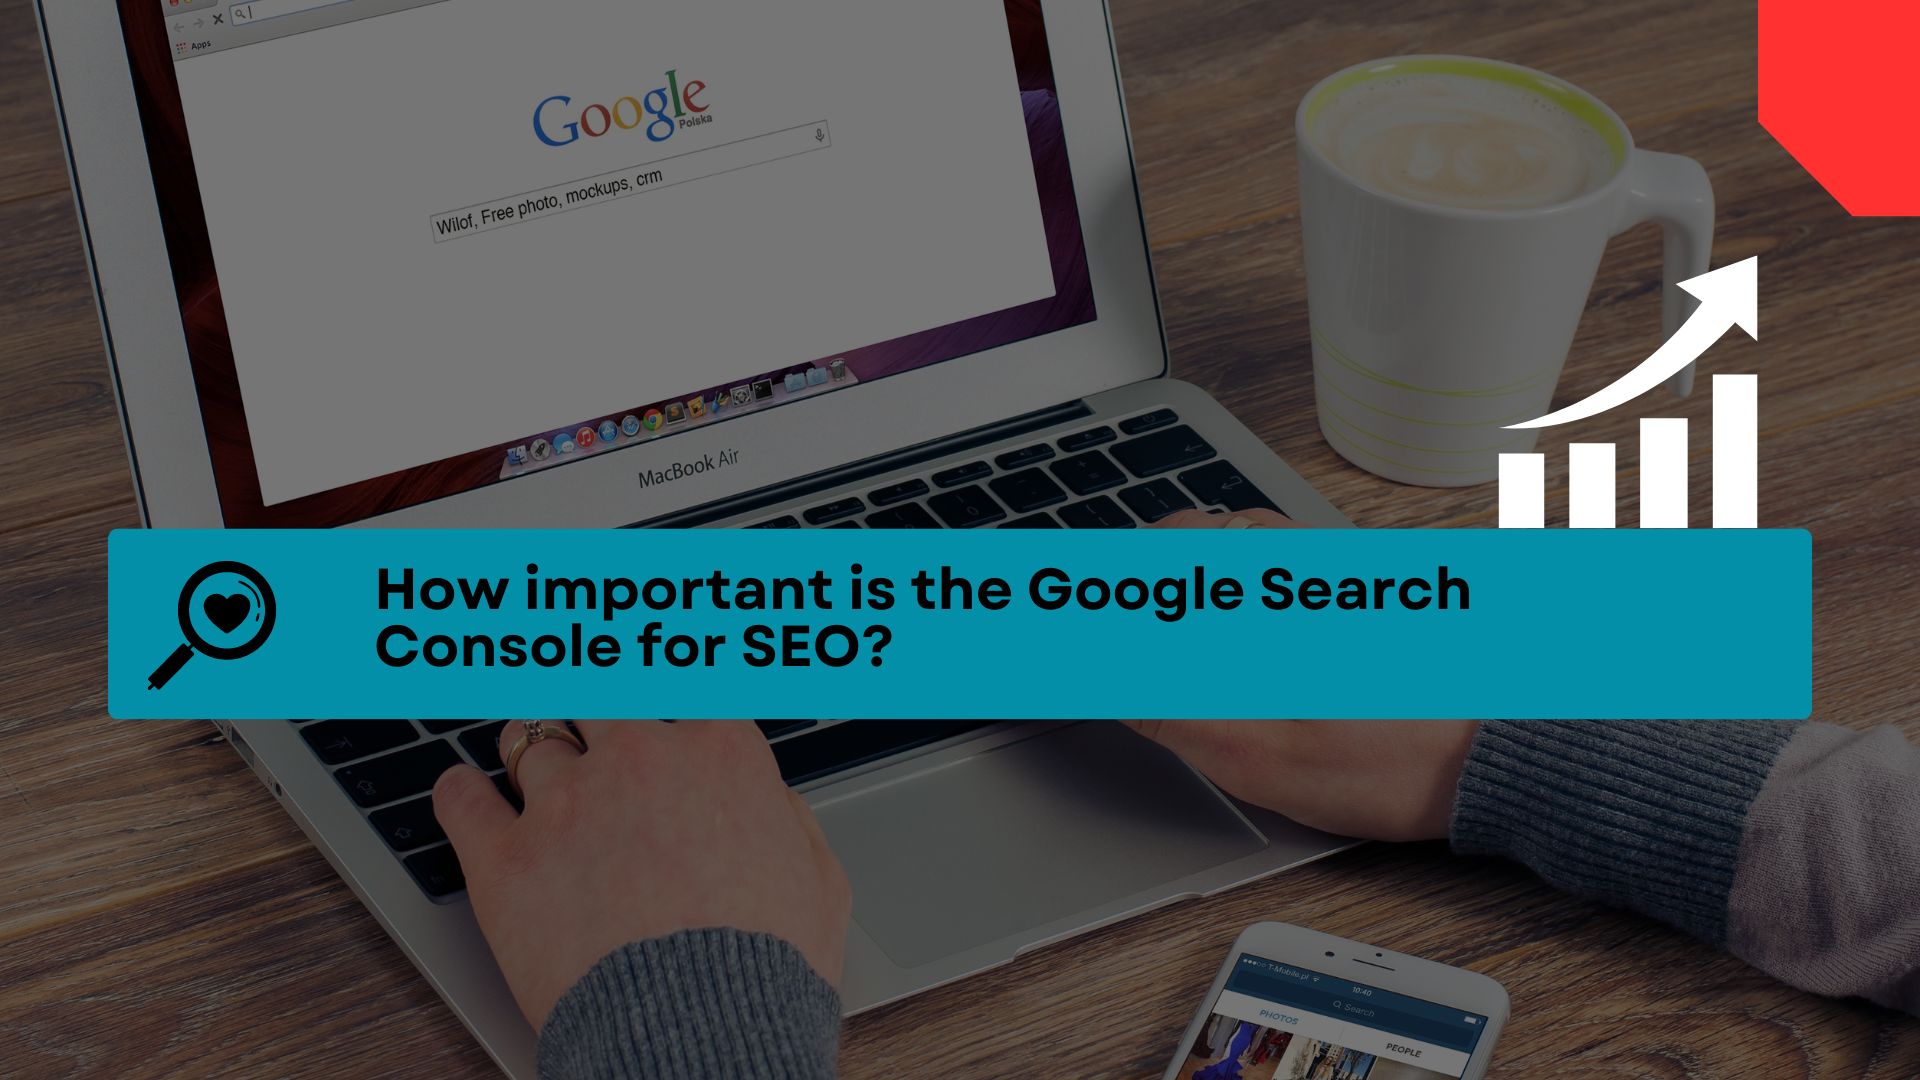 How important is the Google Search Console for SEO?